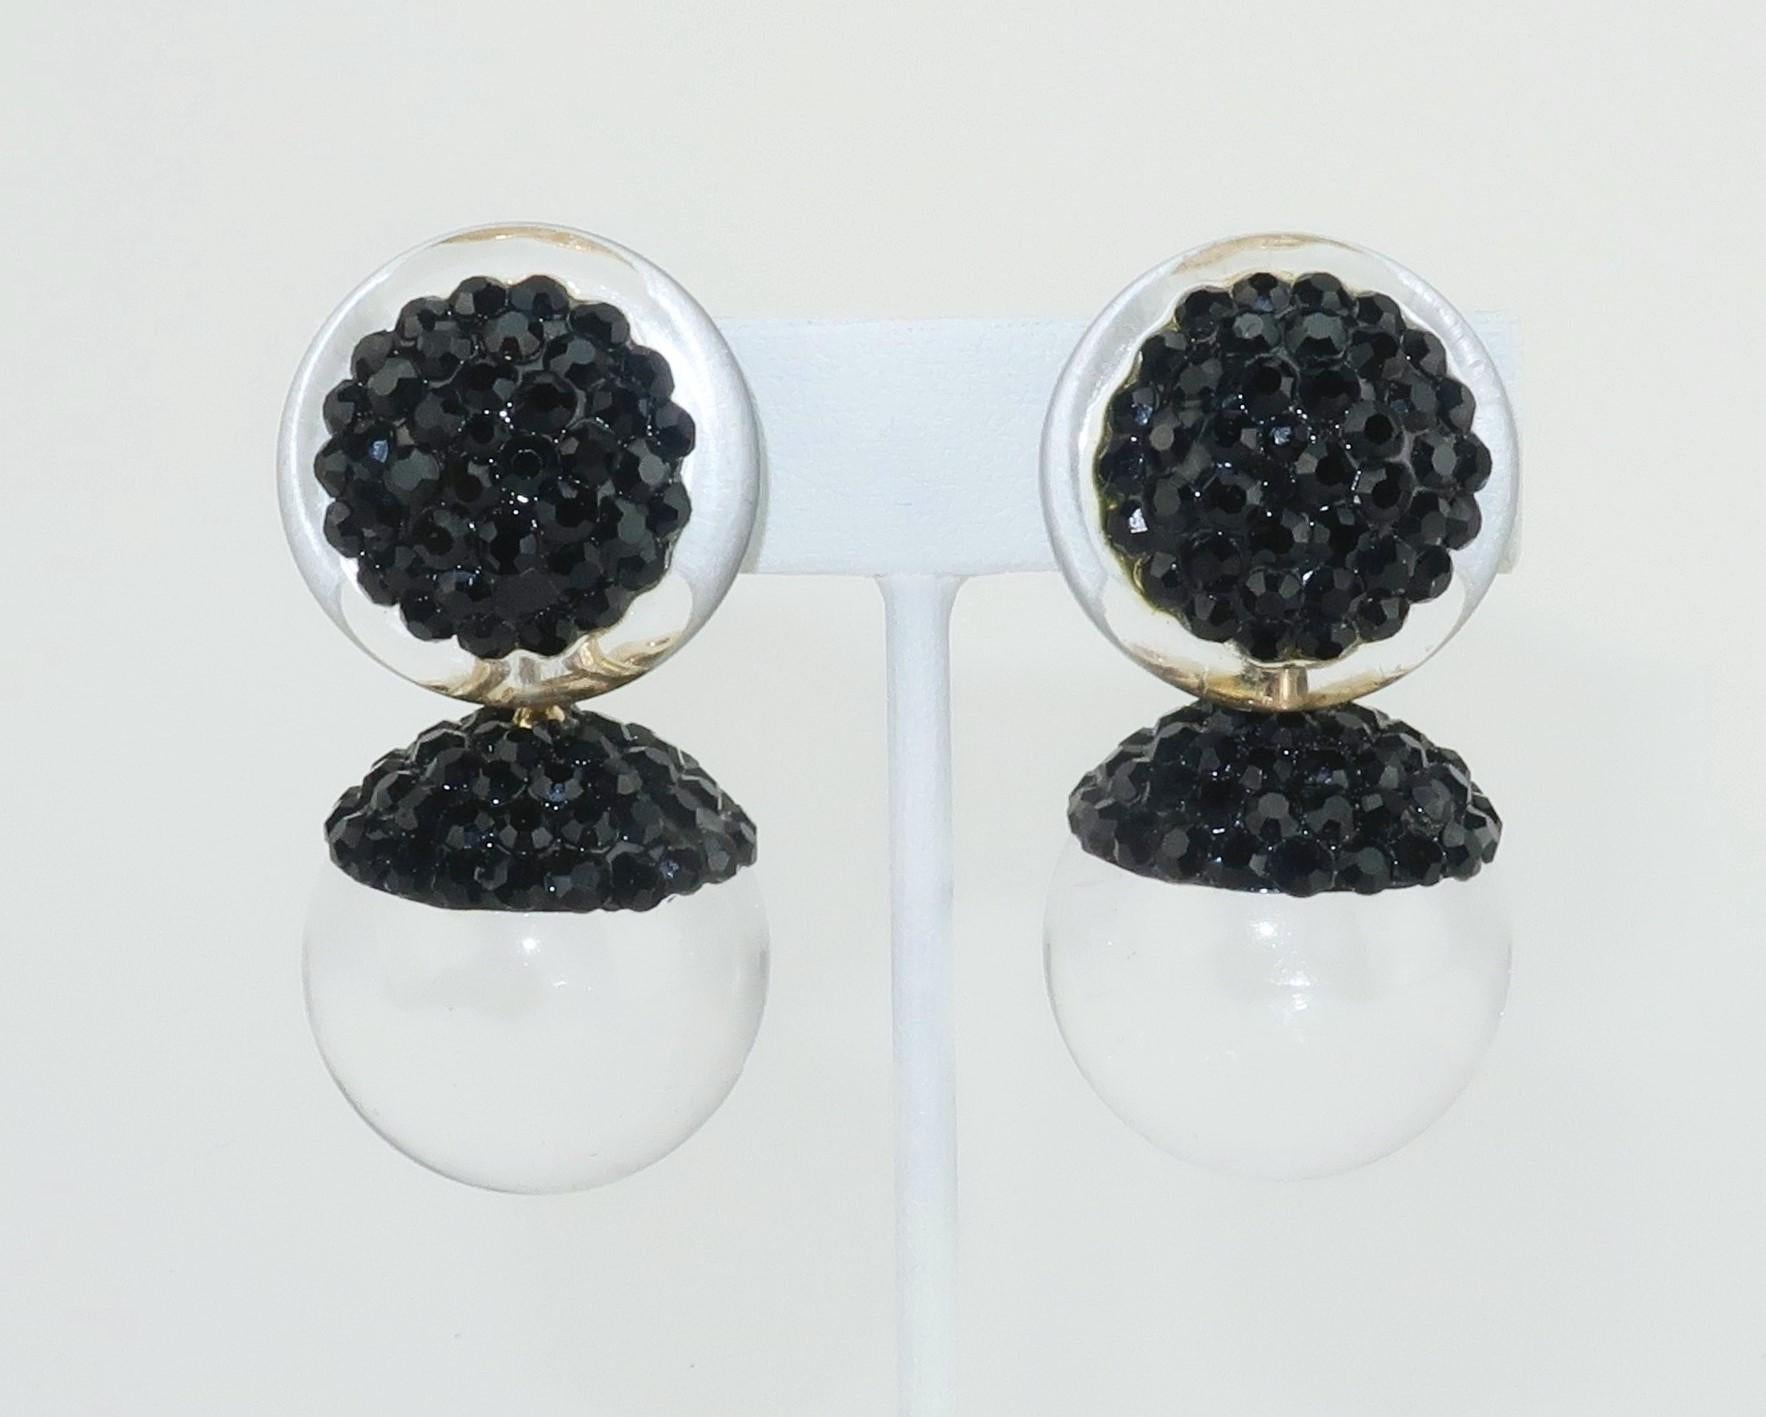 Elegant 1980’s Richard Kerr clip-on dangle earrings designed with black pave crystals (a Kerr calling card) and orb shaped acrylic drops.  Richard Kerr’s creations are often disco ready looks with loads of pave crystal bling but these are a little